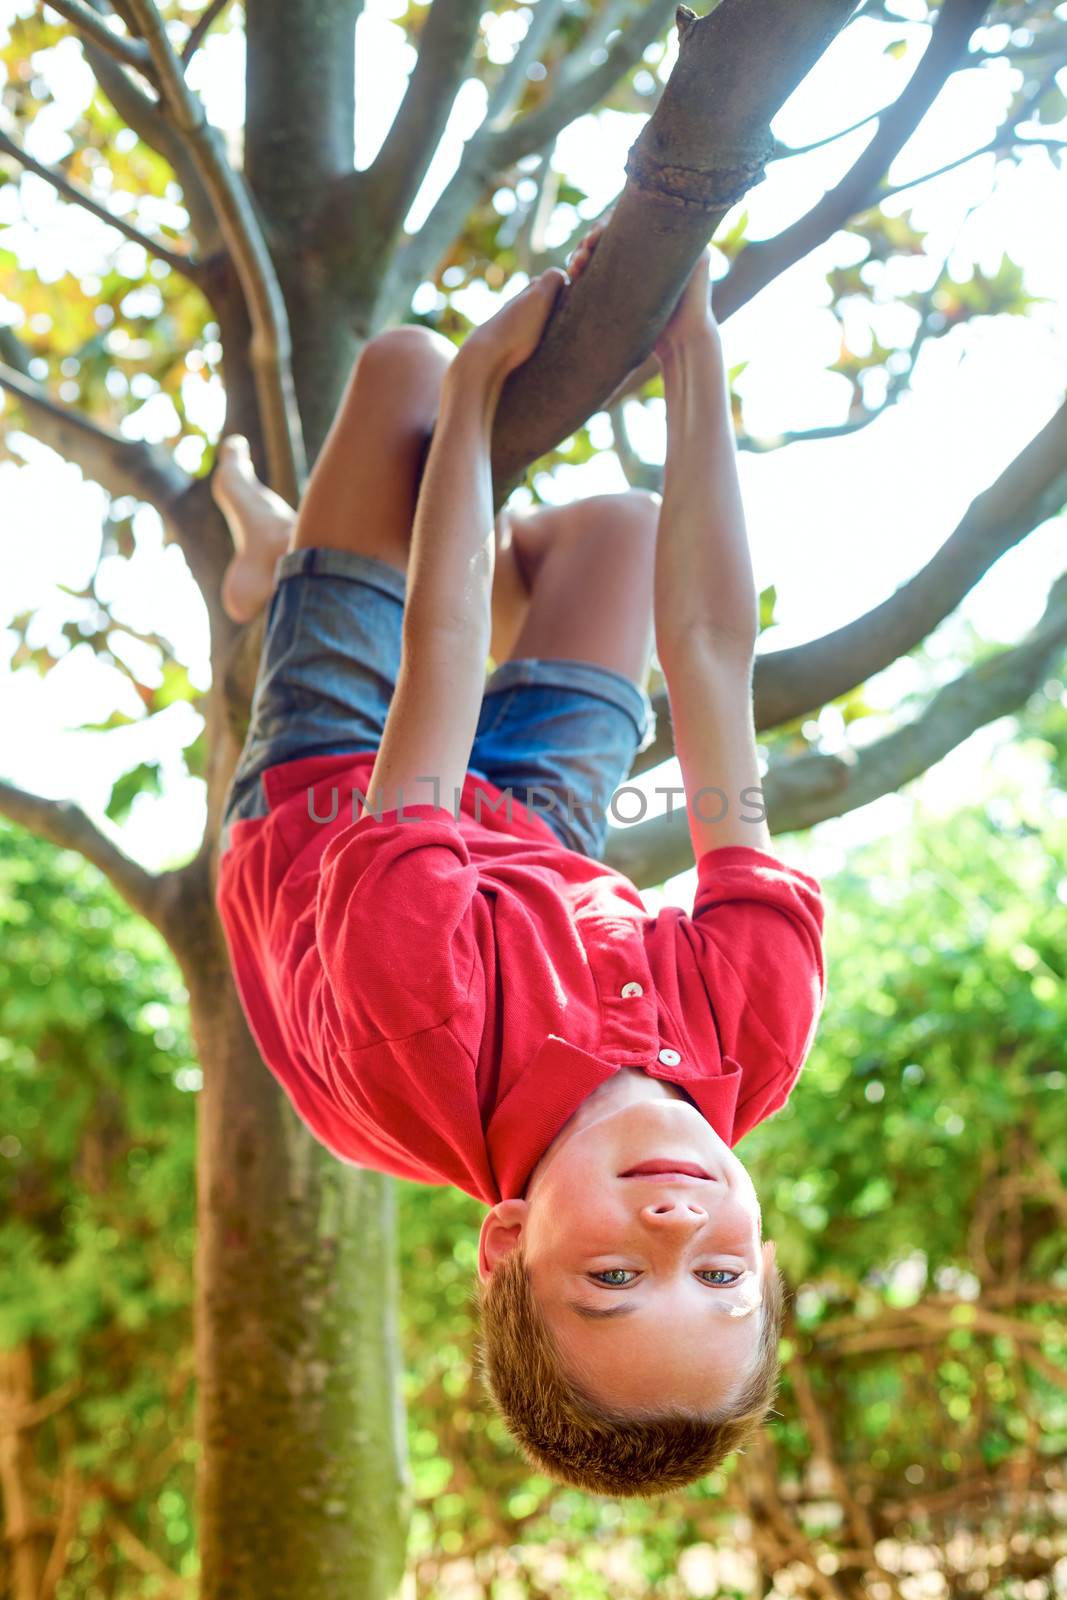 Boy hanging from a tree branch by naumoid